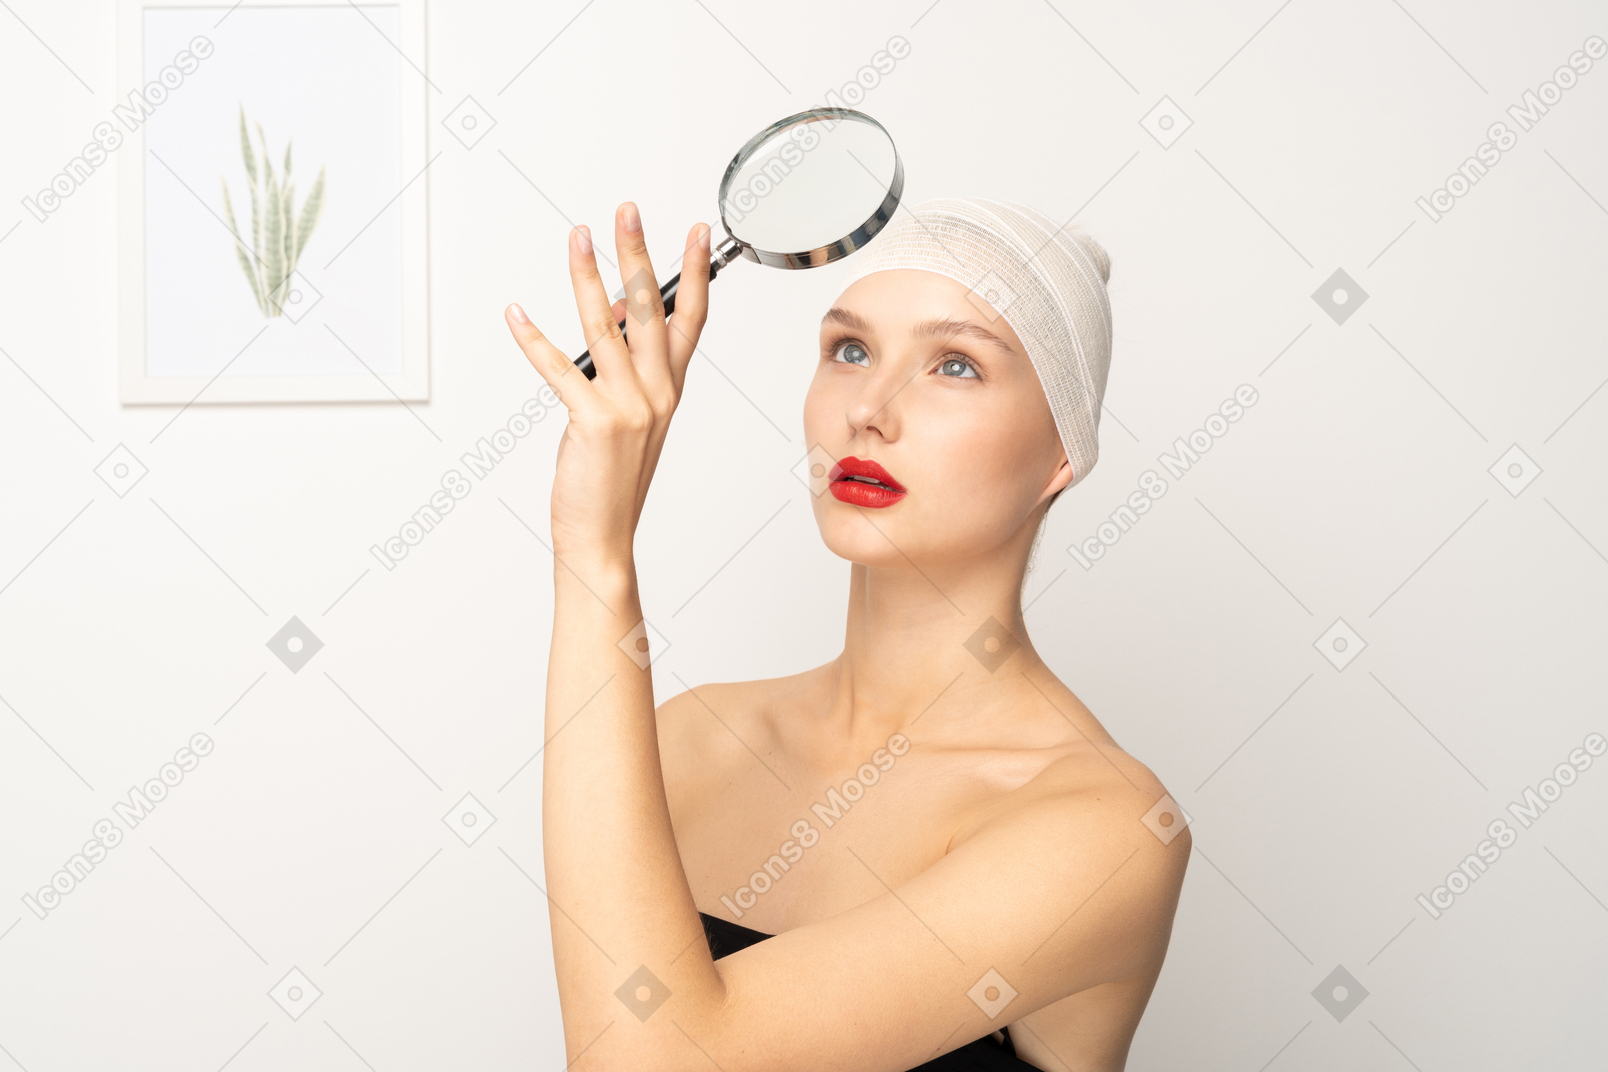 Portrait of a young woman holding up magnifying glass